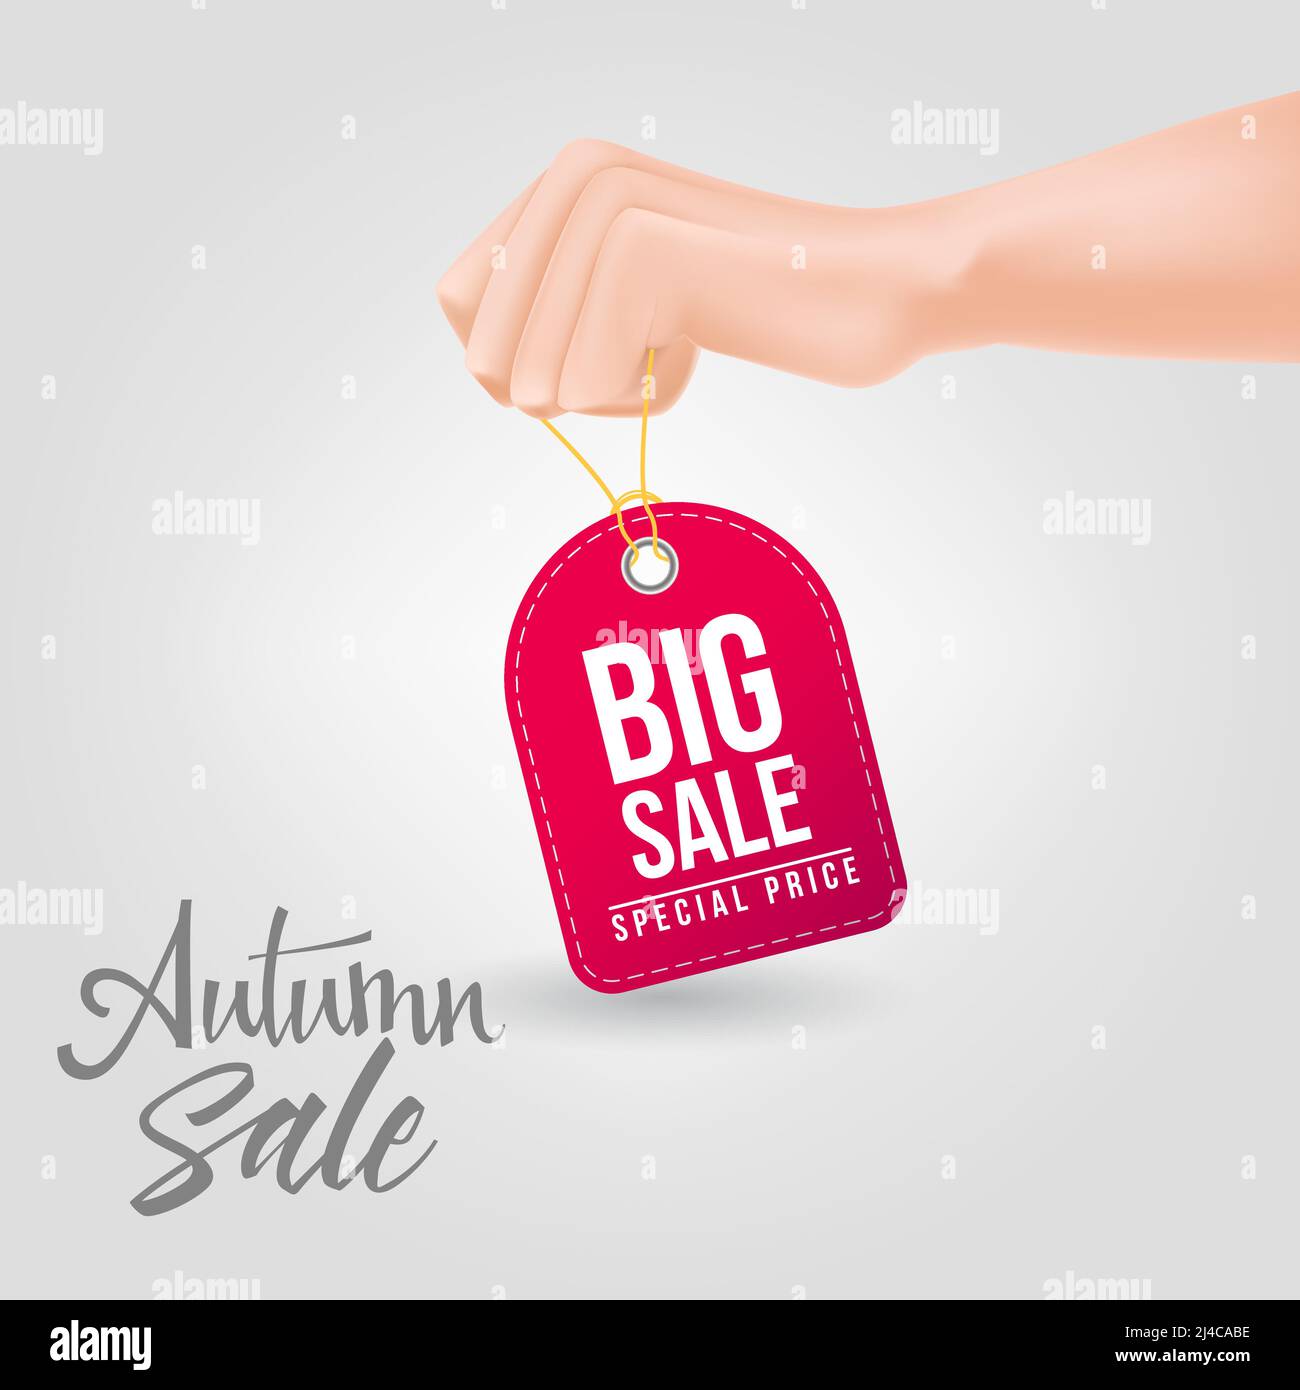 Big sale, special price lettering on tag being held with hand. Autumn offer or sale advertising design. Handwritten and typed text, calligraphy. For l Stock Vector